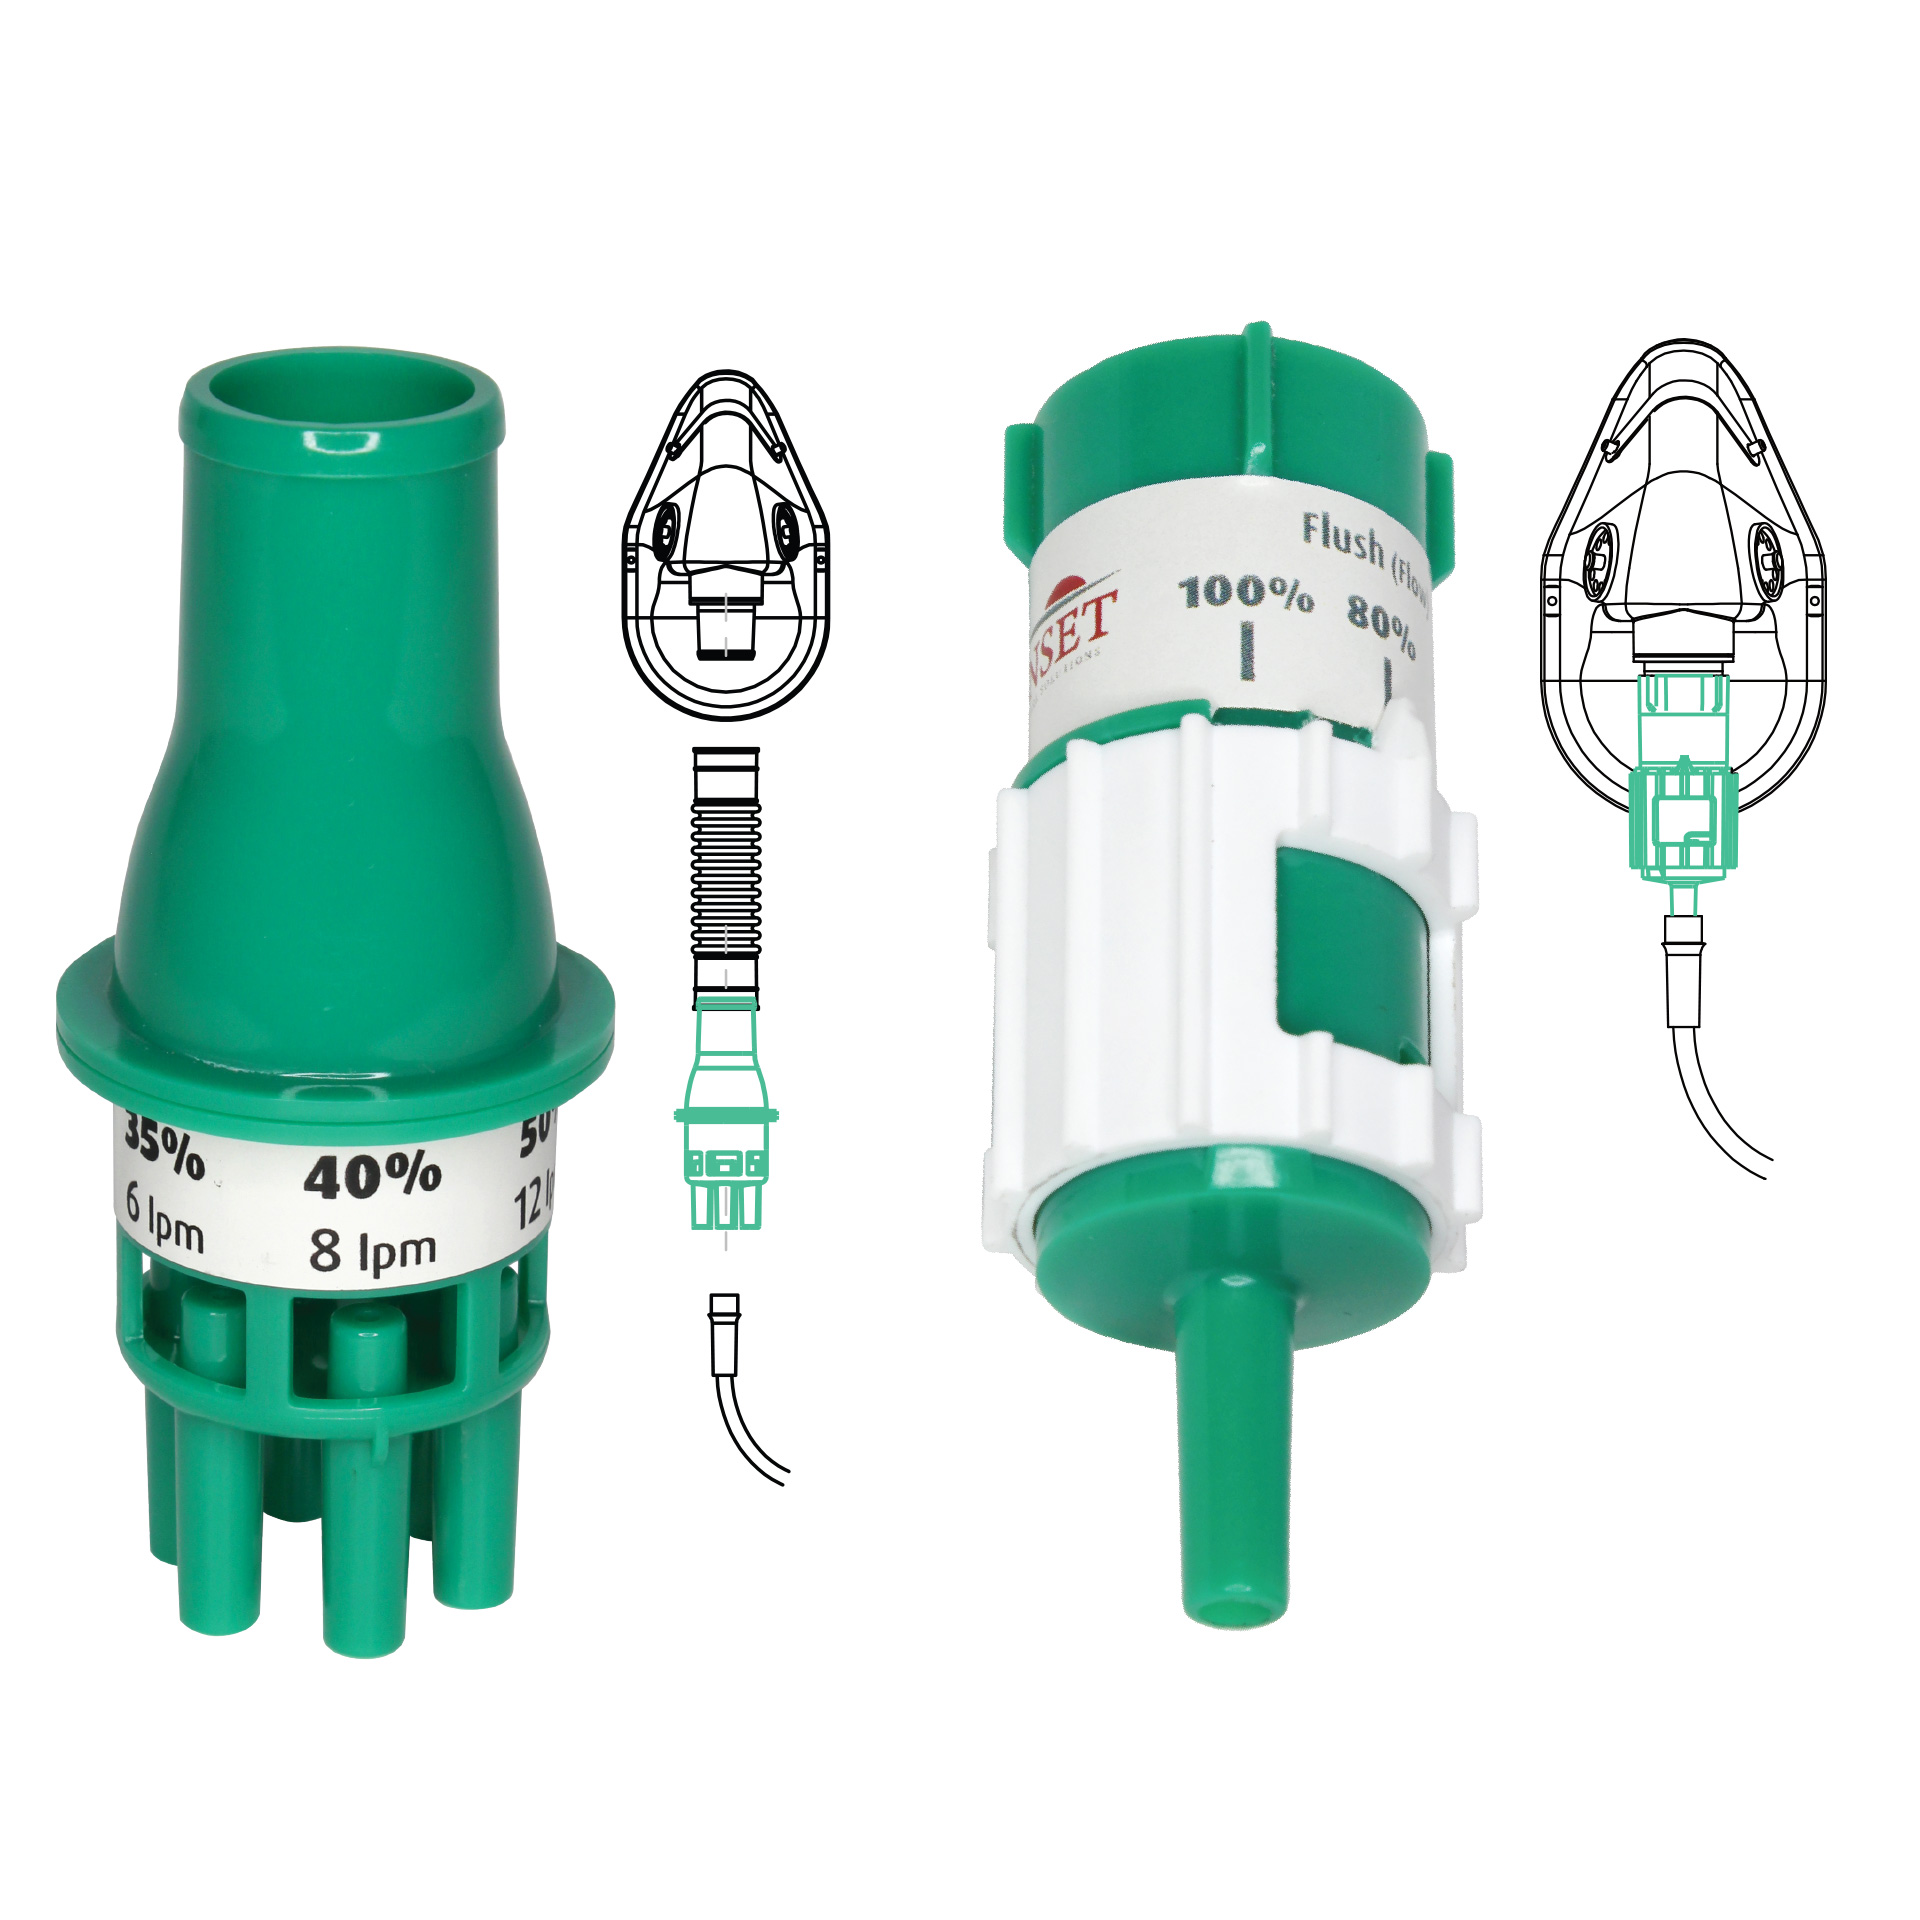 Image of Lynx Venturi oxygen delivery system, Low concentration on the left and high concentration on the right